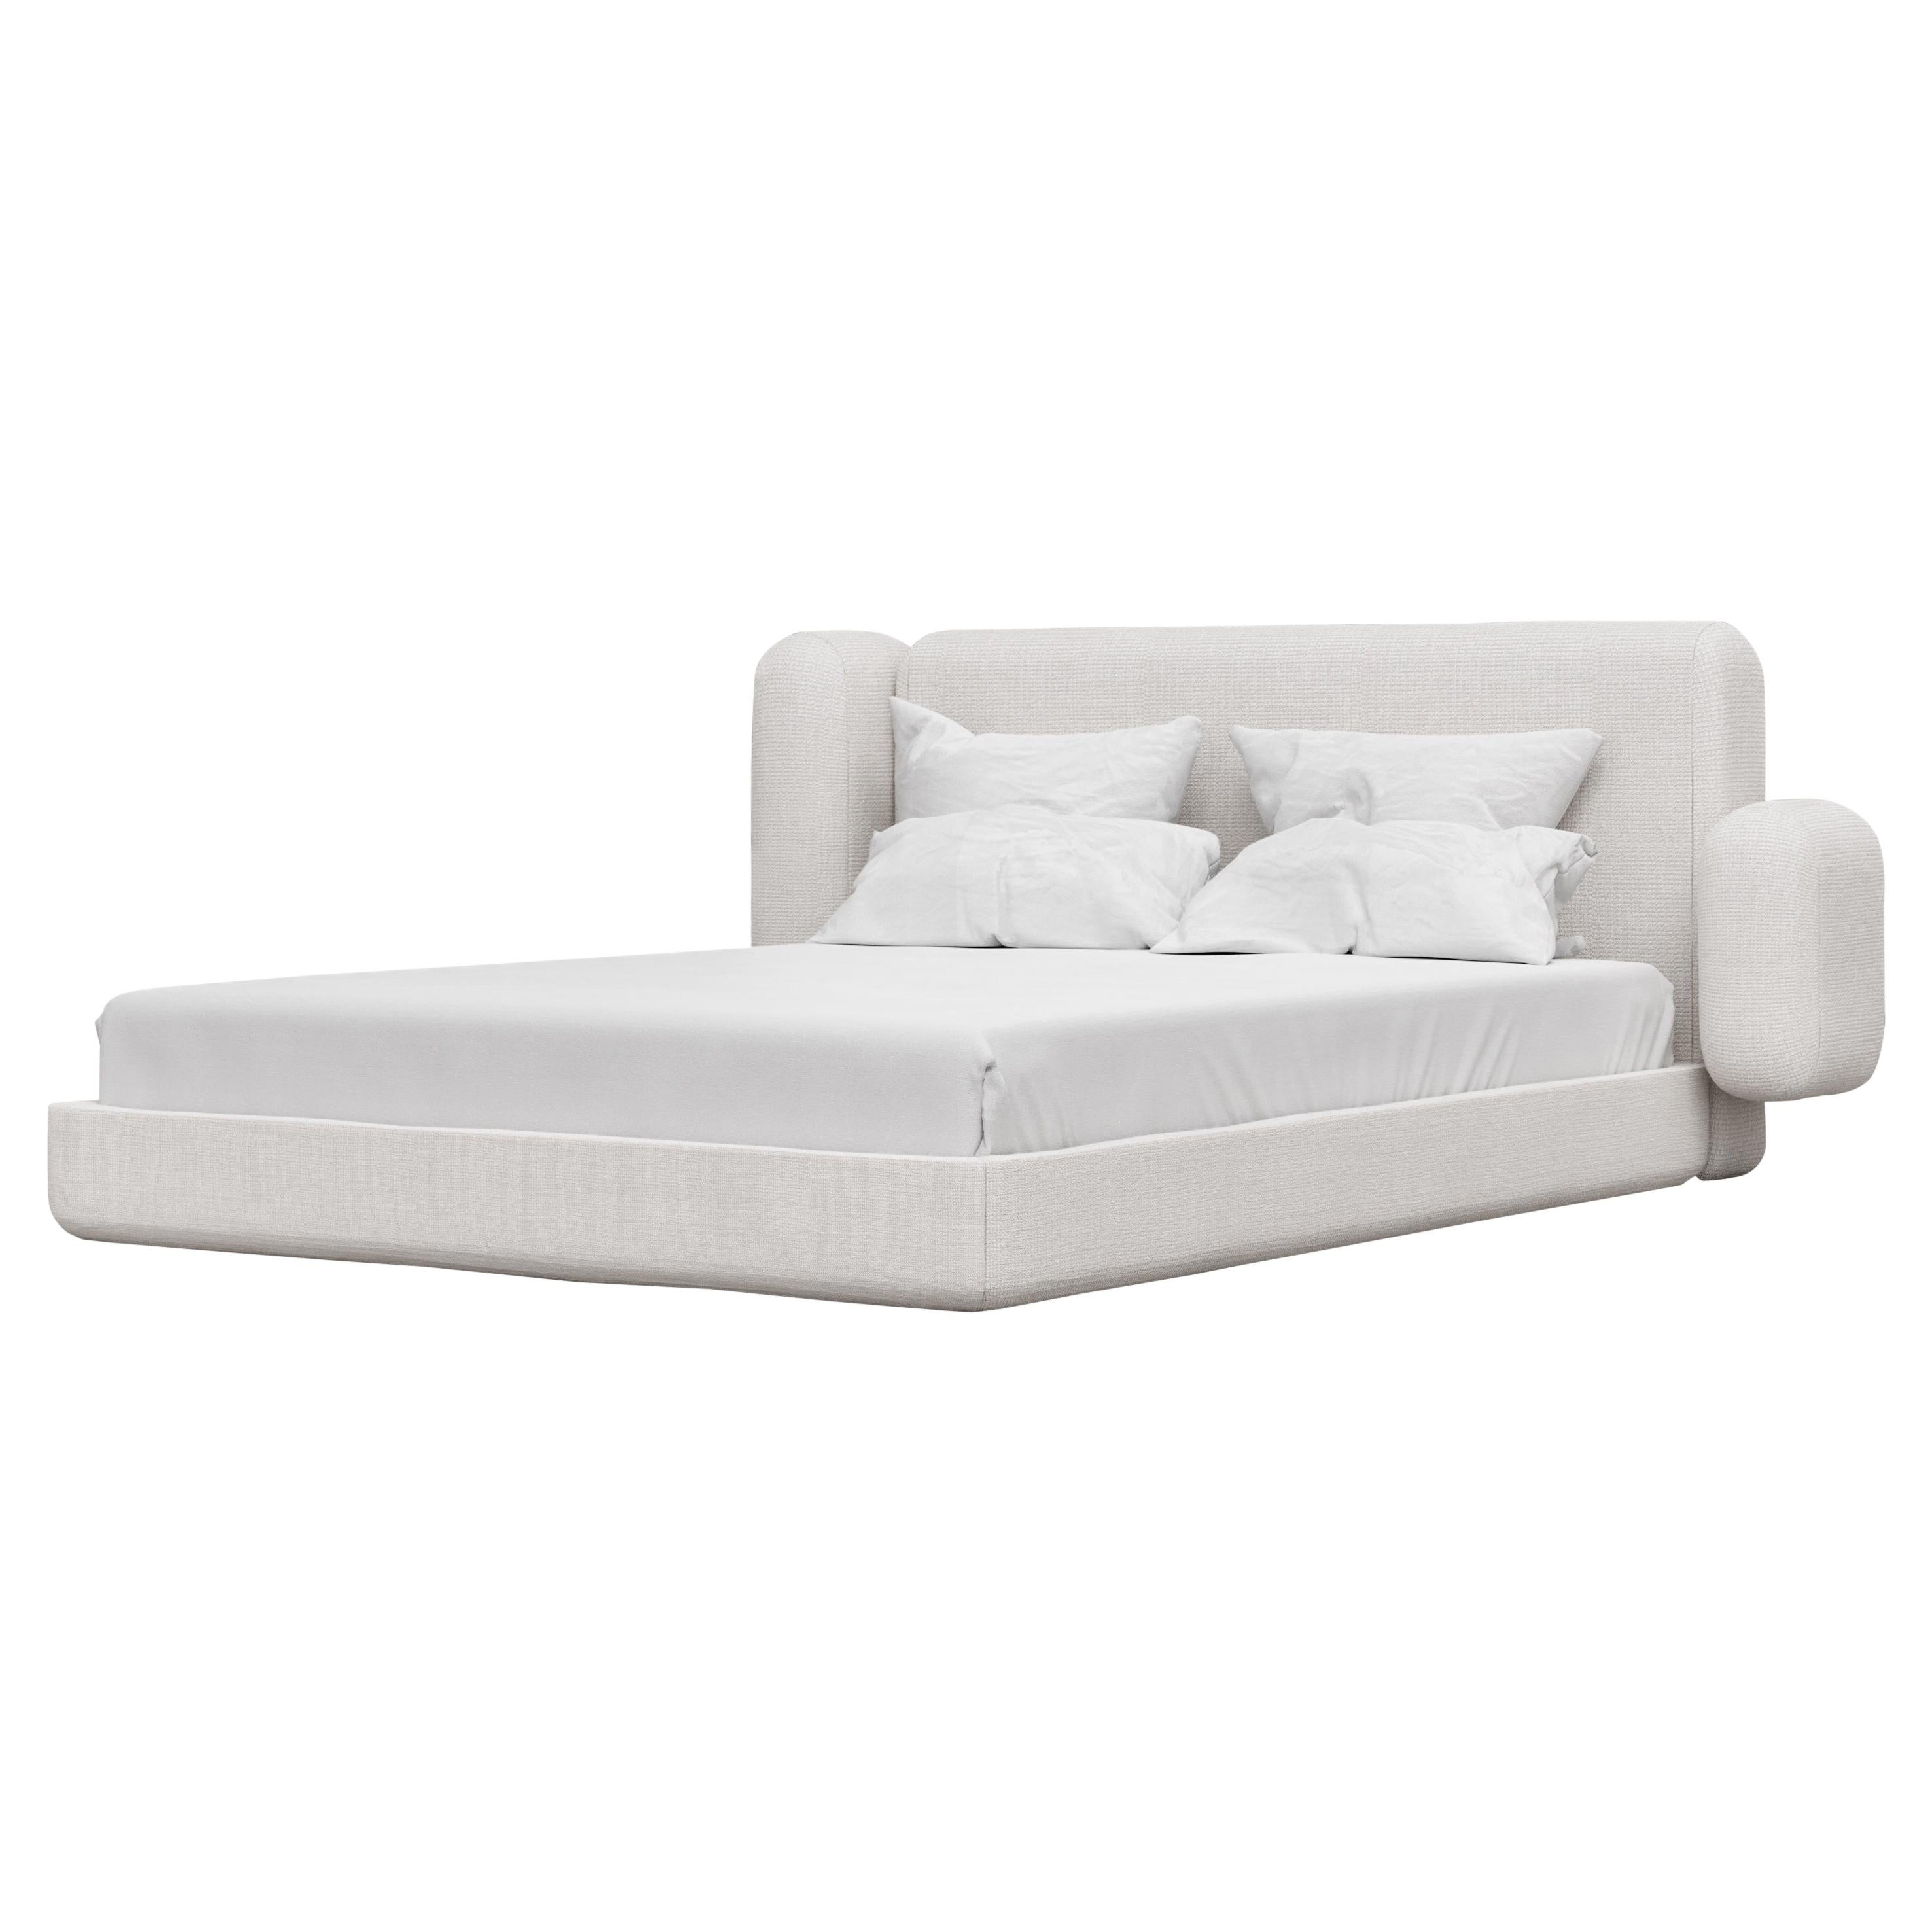 ASYM BED - Modern Asymmetrical Bed in Curly Lamb Boucle in Soft White For Sale